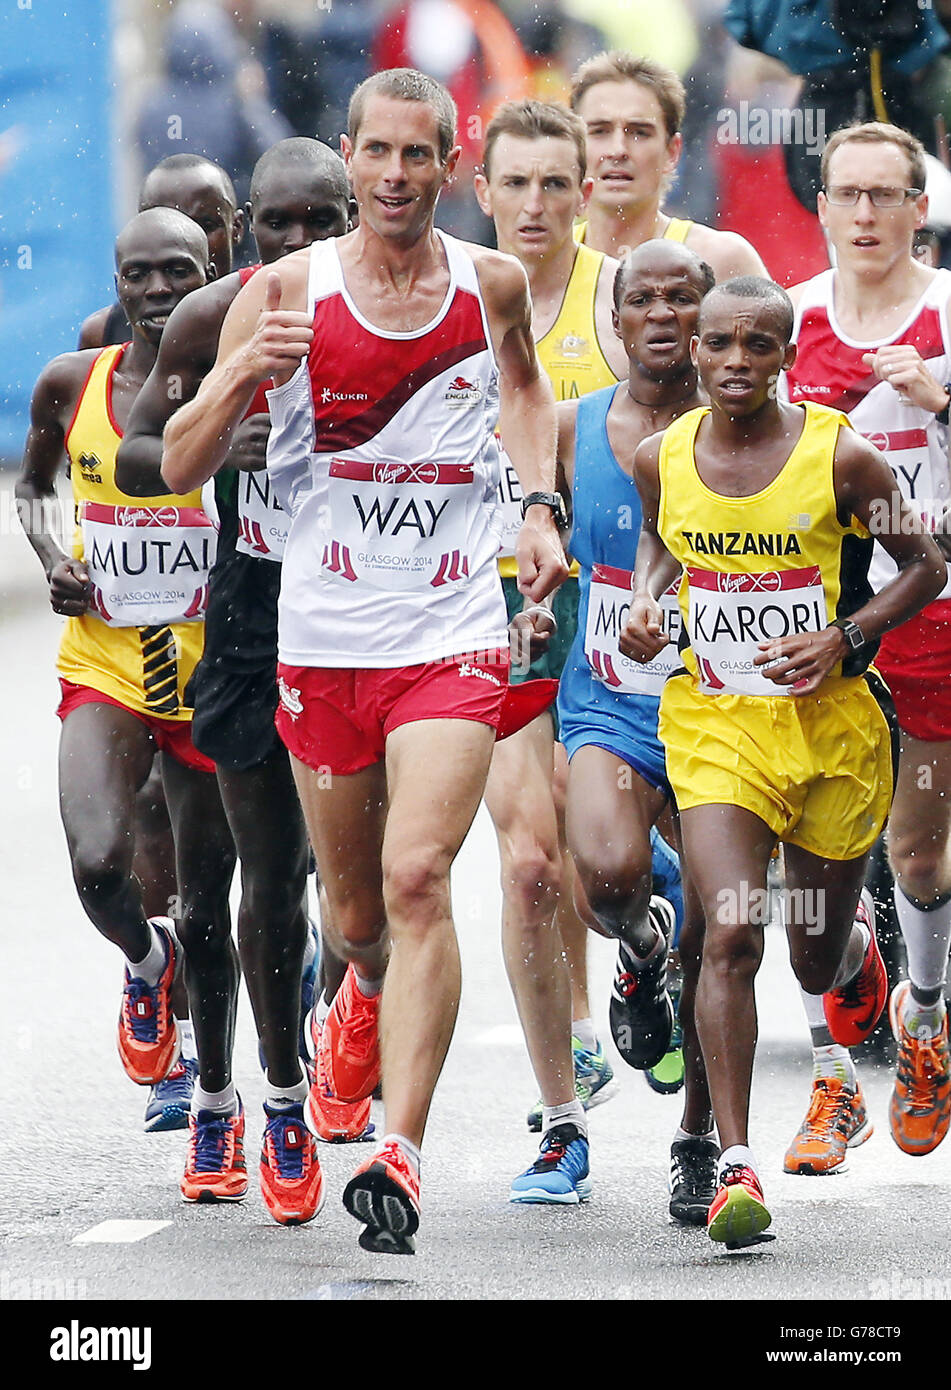 England's Steven Way in action during the Men's Marathon during the 2014 Commonwealth Games in Glasgow during the 2014 Commonwealth Games in Glasgow. Stock Photo